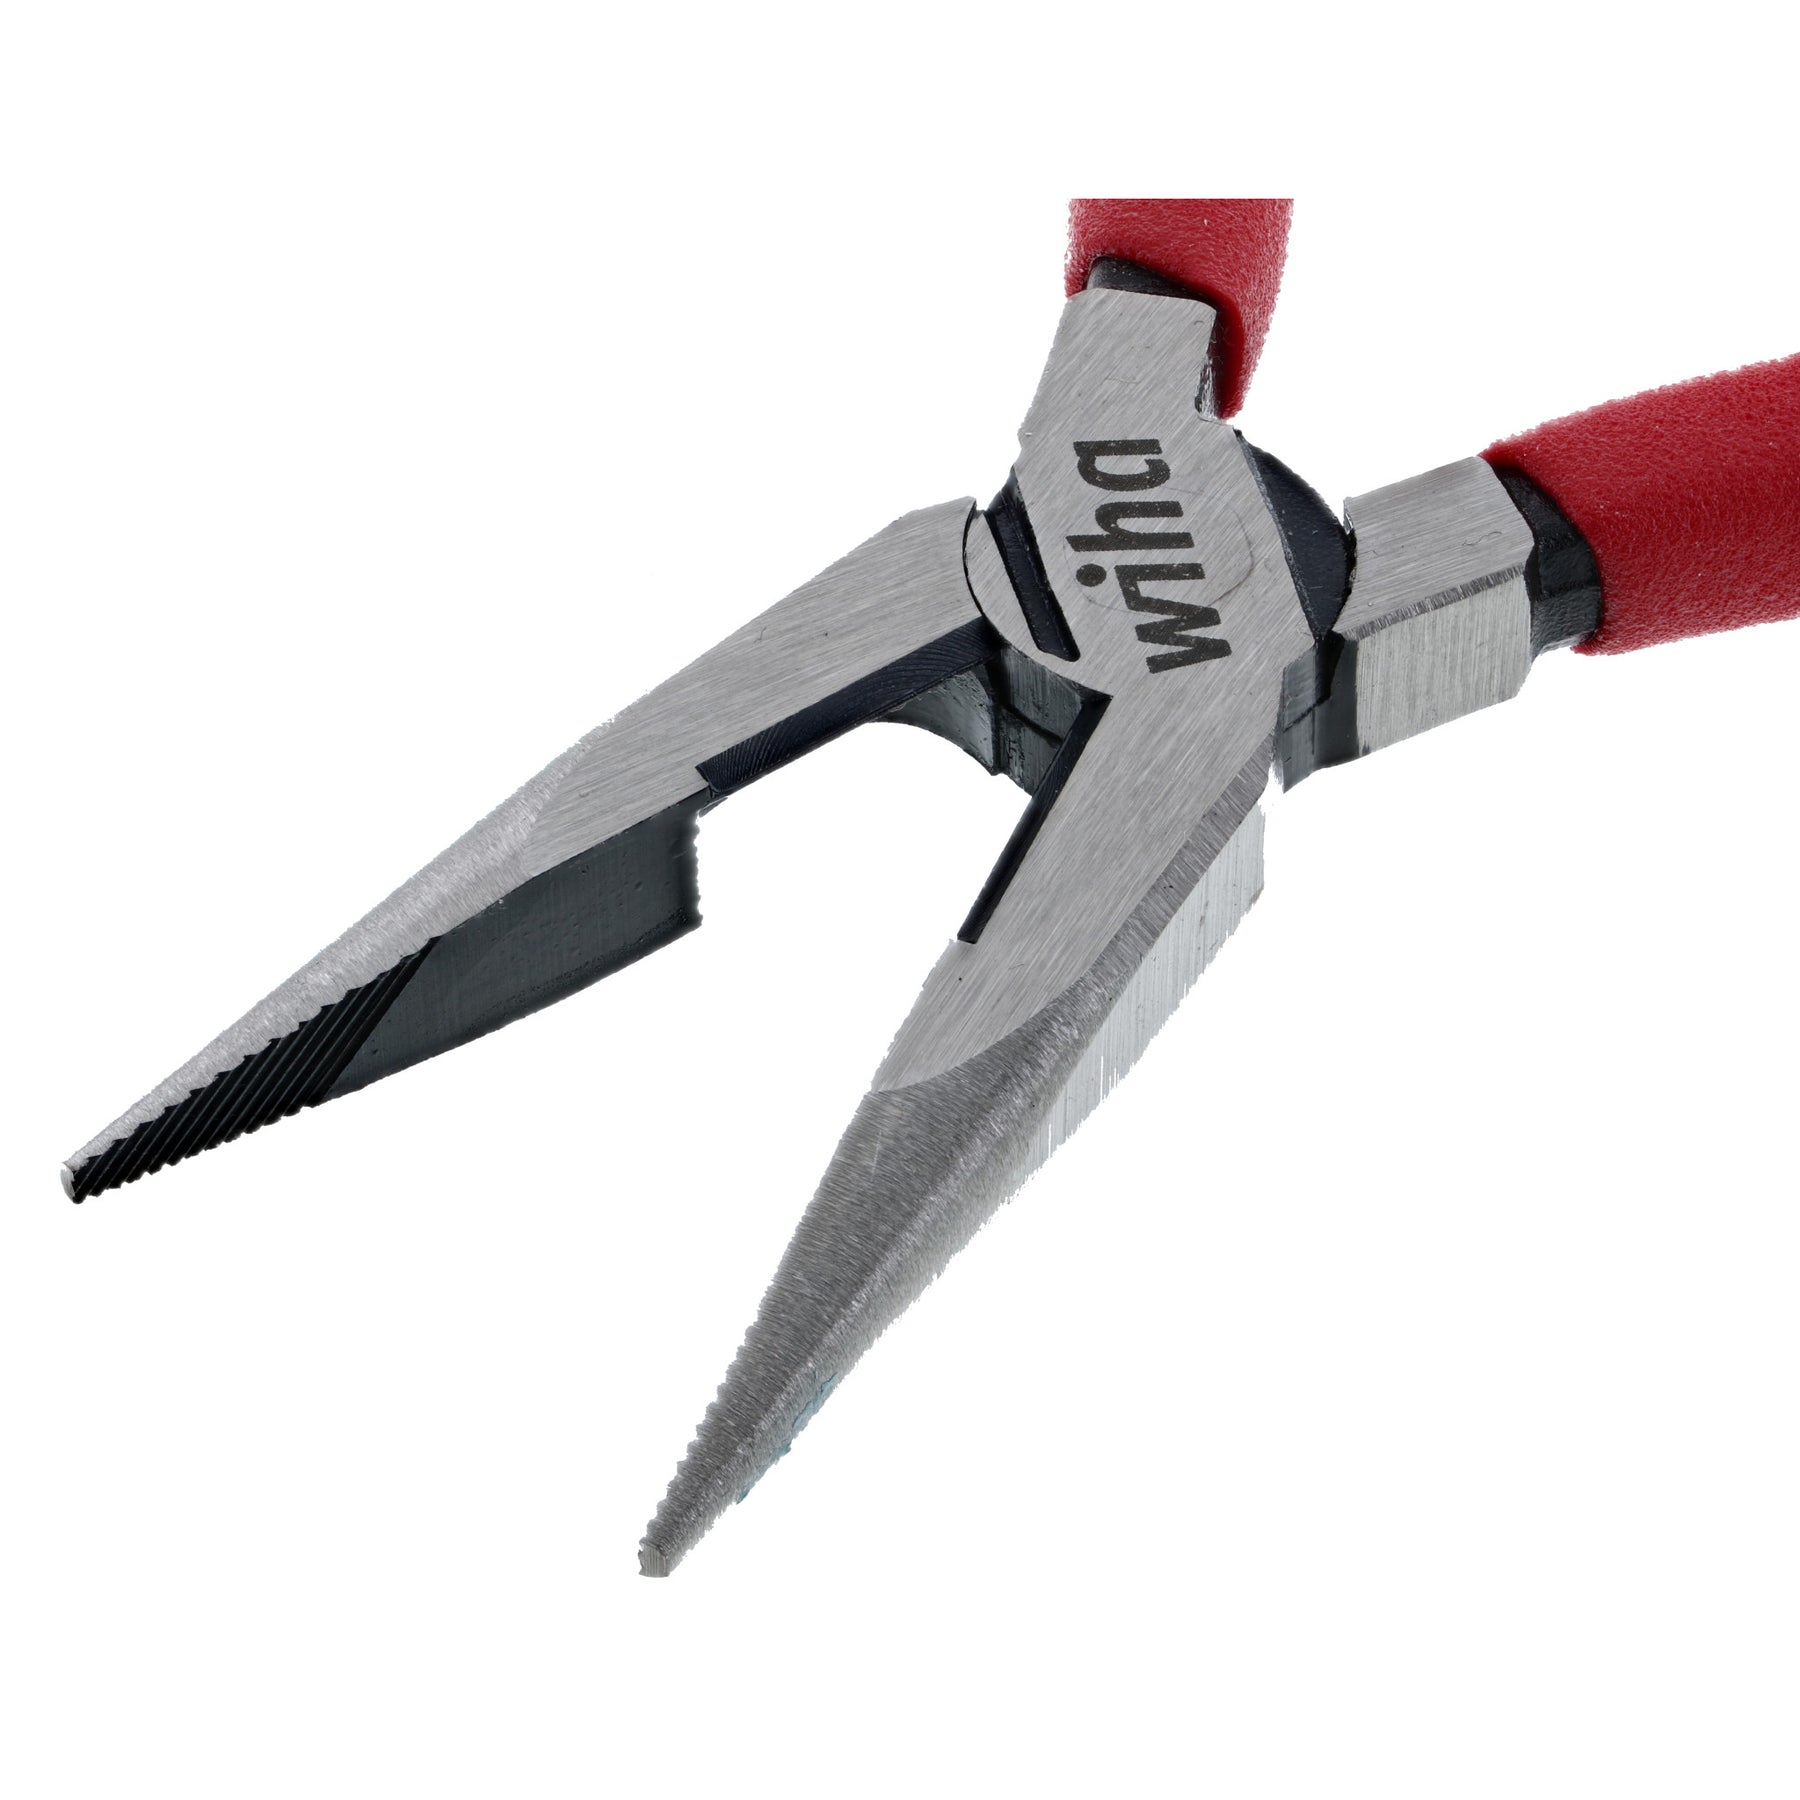 3 Piece Classic Grip Pliers and Cutters Set